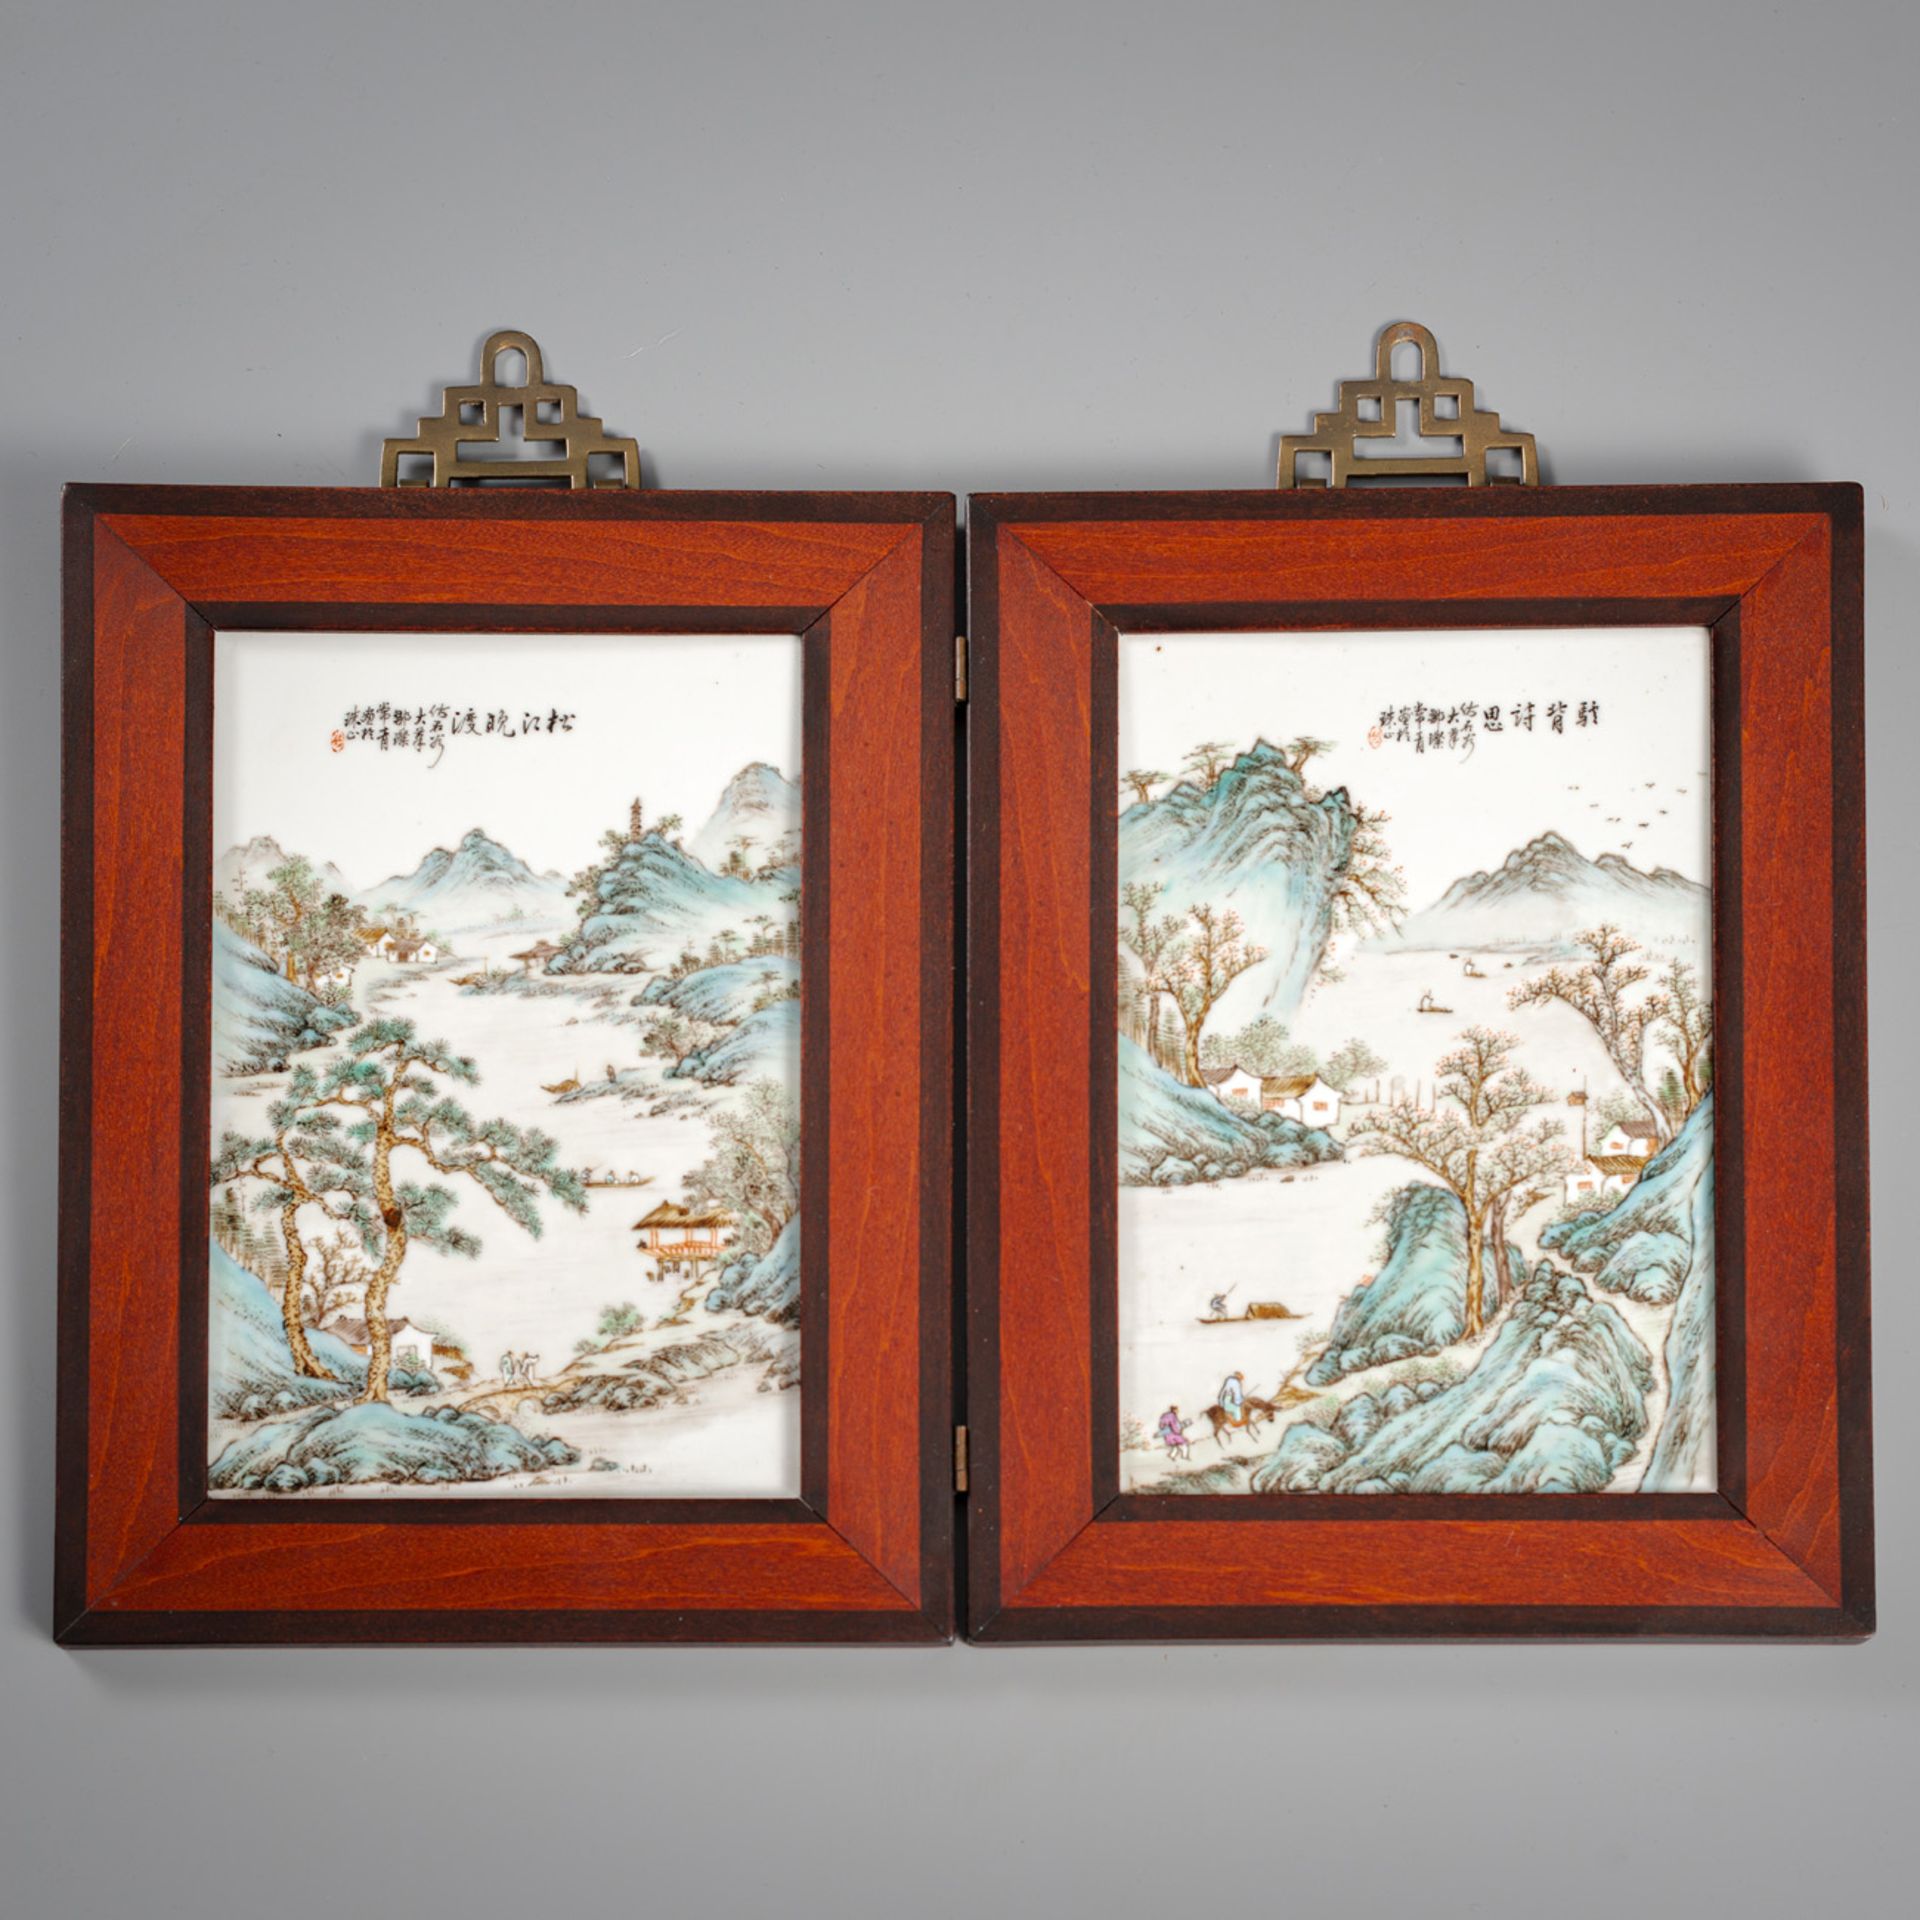 A PAIR OF SMALL PORCELAIN TILES PATINTED WITH FINE POLYCHROME LANDSCAPE DEPICTIONS